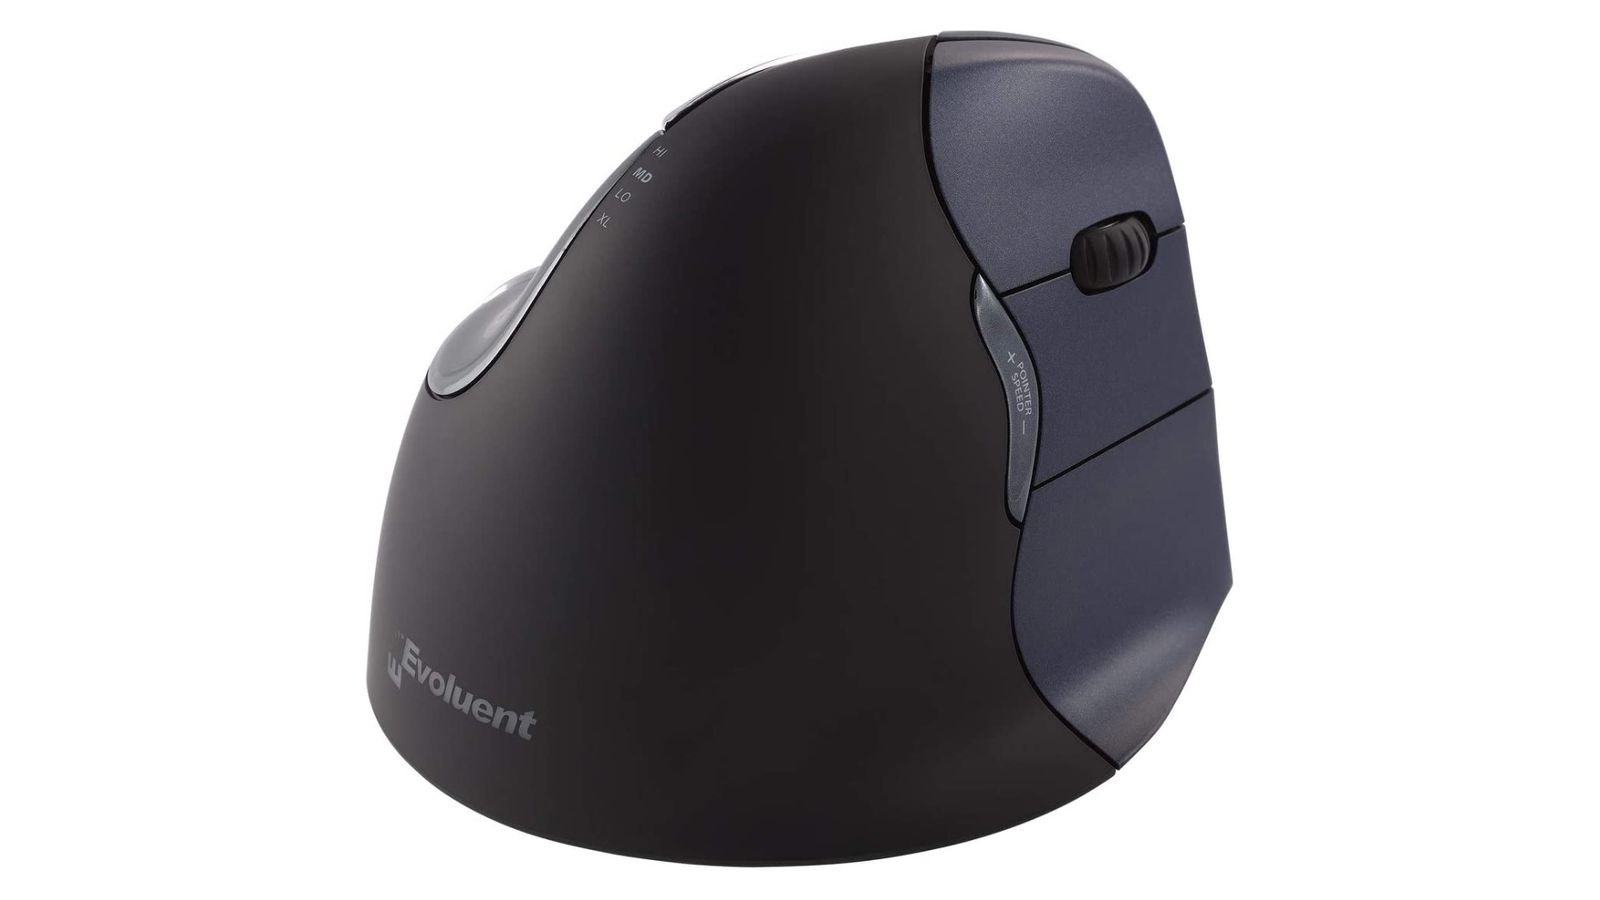 Evoluent Vertical Mouse product image of a black vertical wireless mouse featuring grey Evoluent branding.